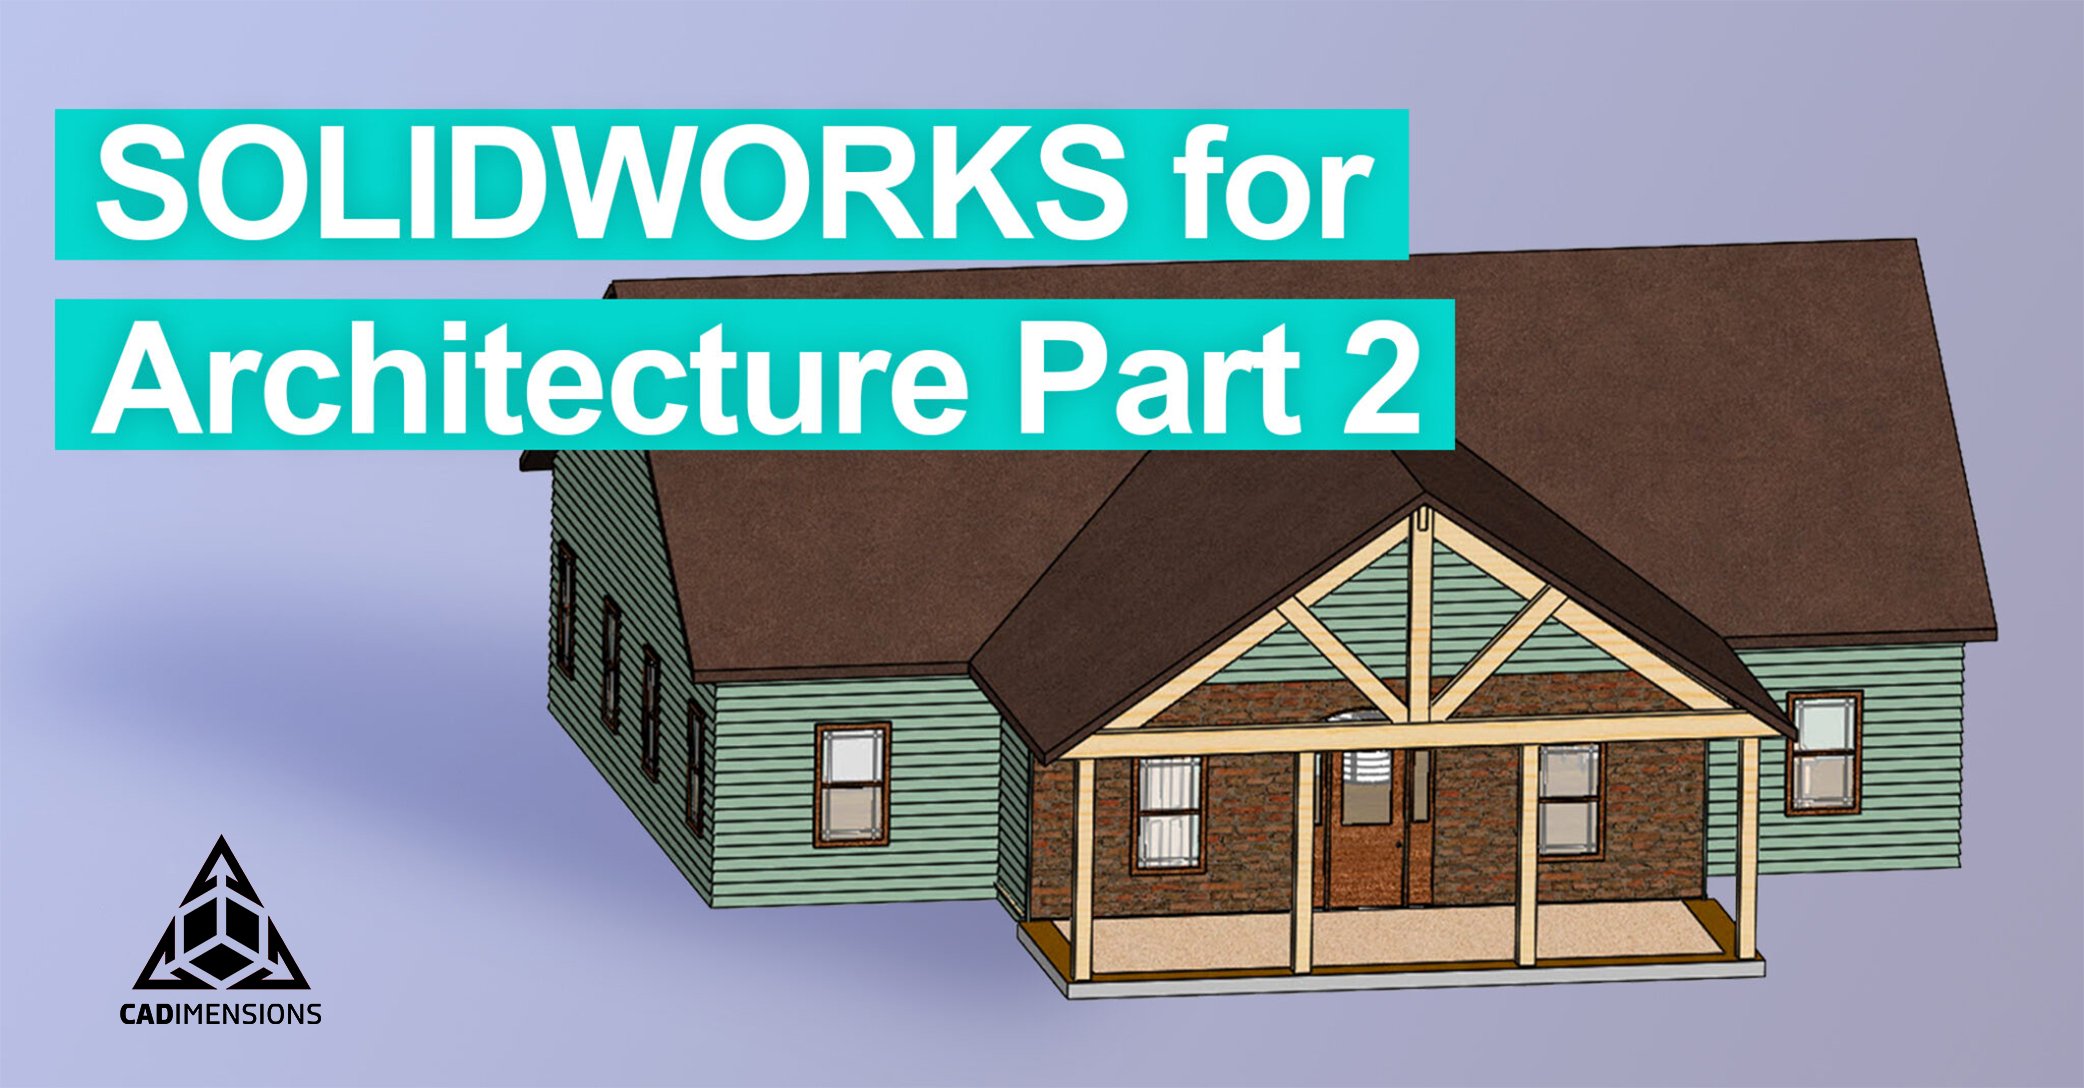 How to Create a Site Plan: SOLIDWORKS for Architecture Part 2